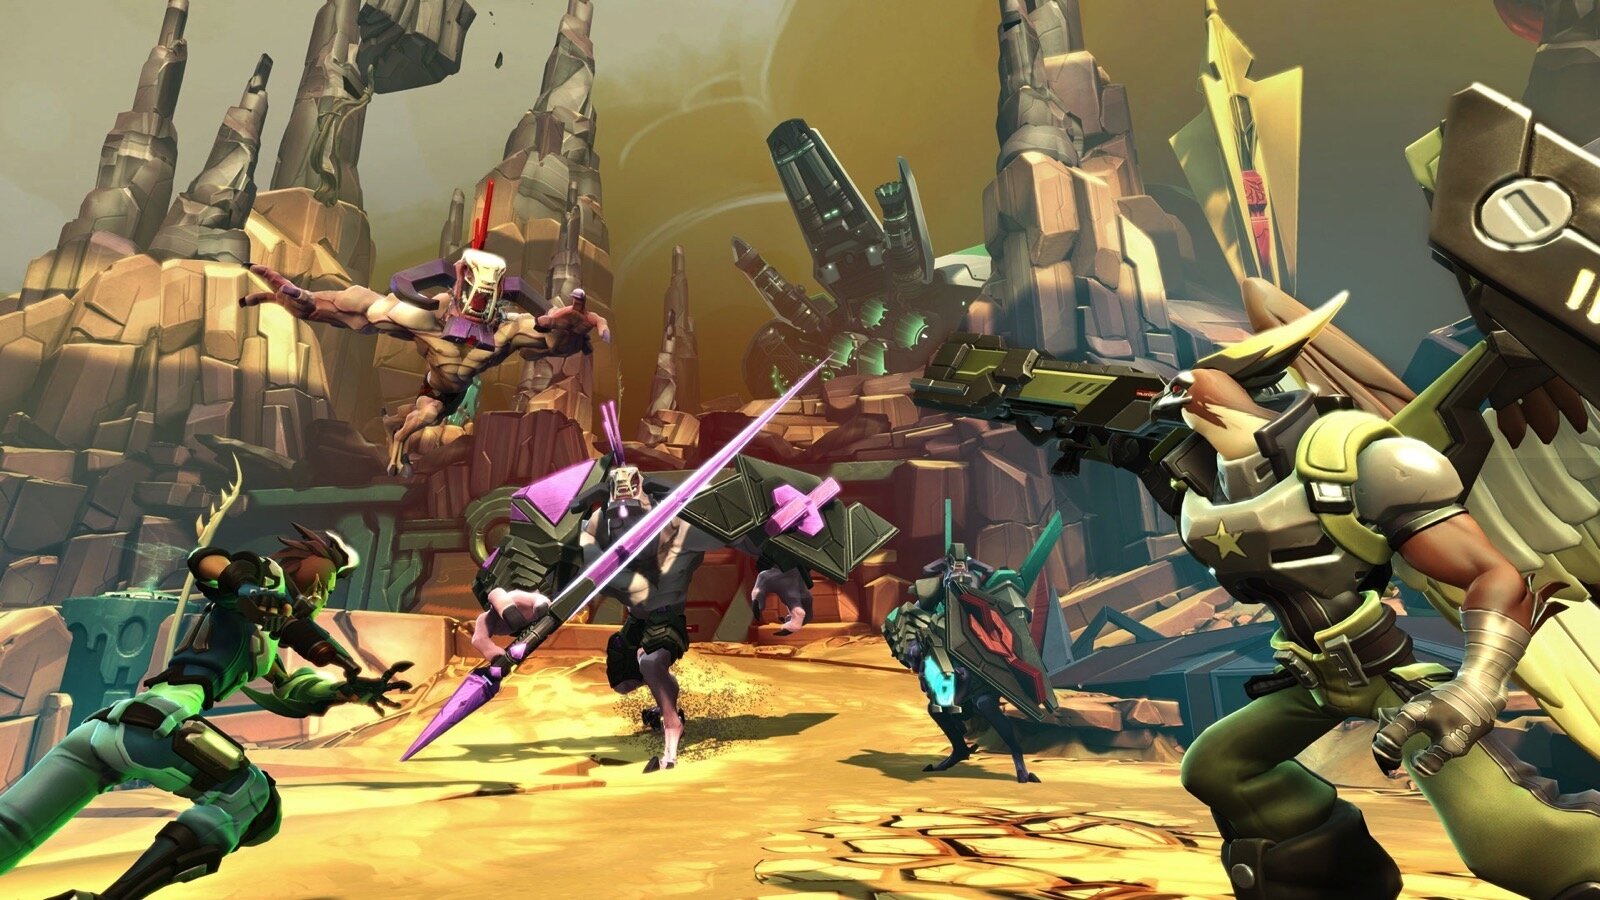 Battleborn never had a chance, releasing less than one month before behemoth Overwatch.